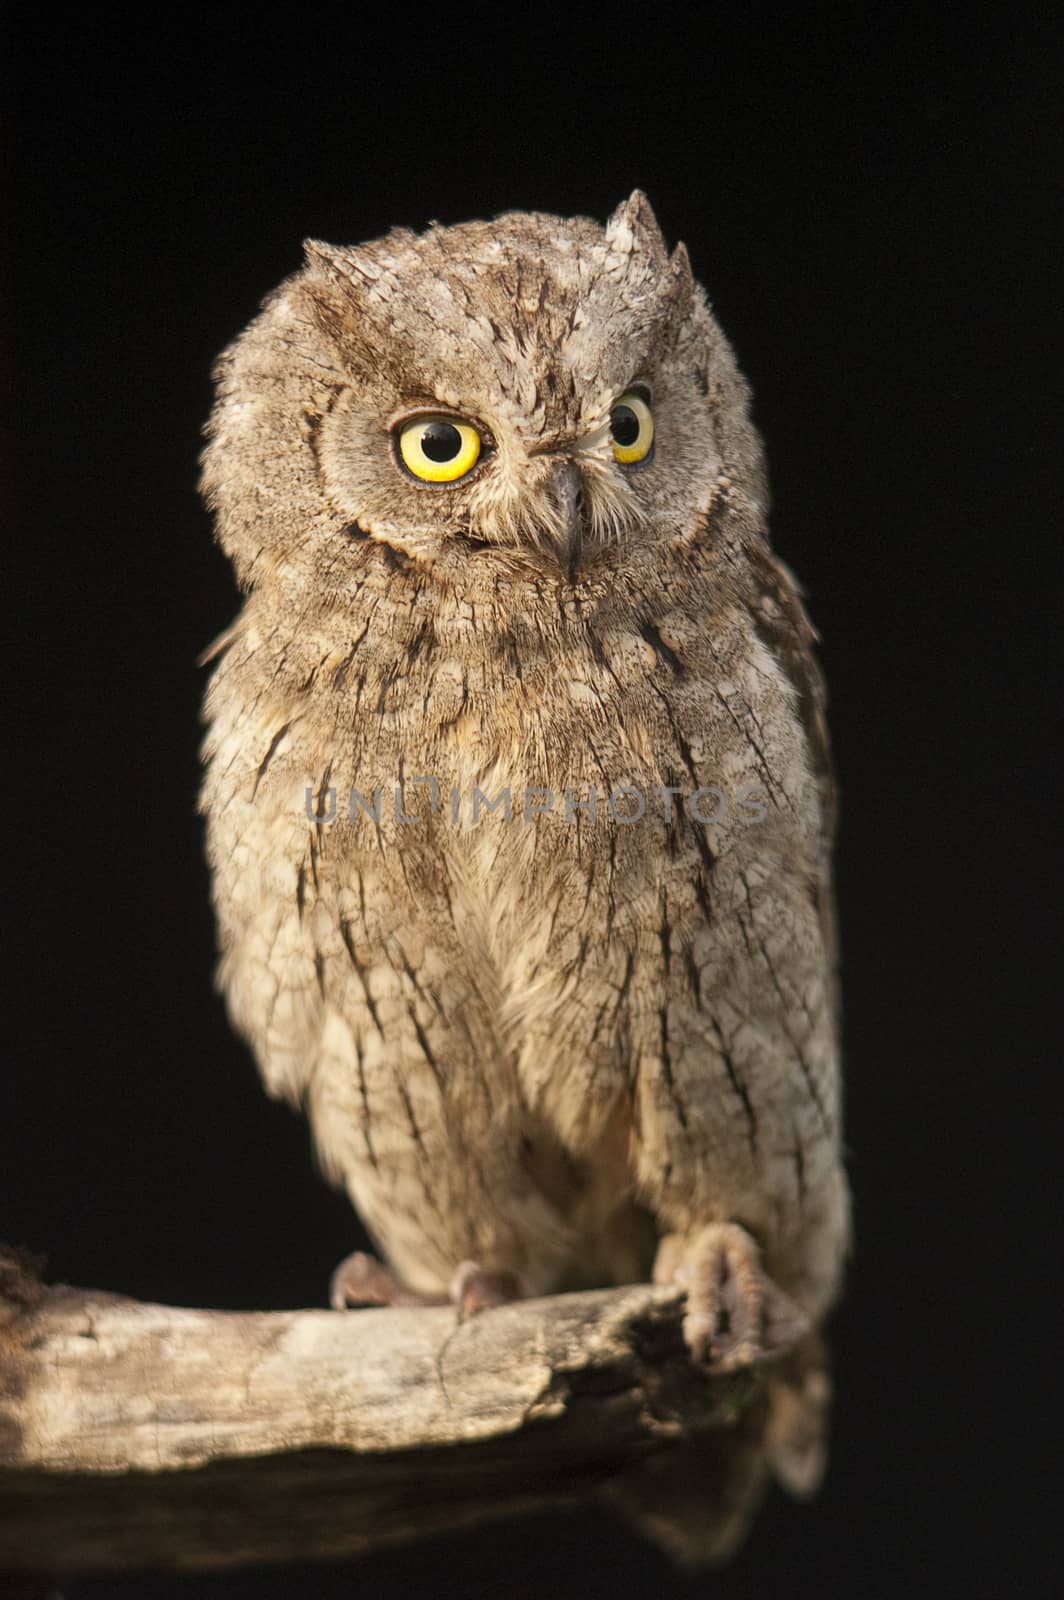 Eurasian Scops Owl, small owl, perched on a branch by jalonsohu@gmail.com